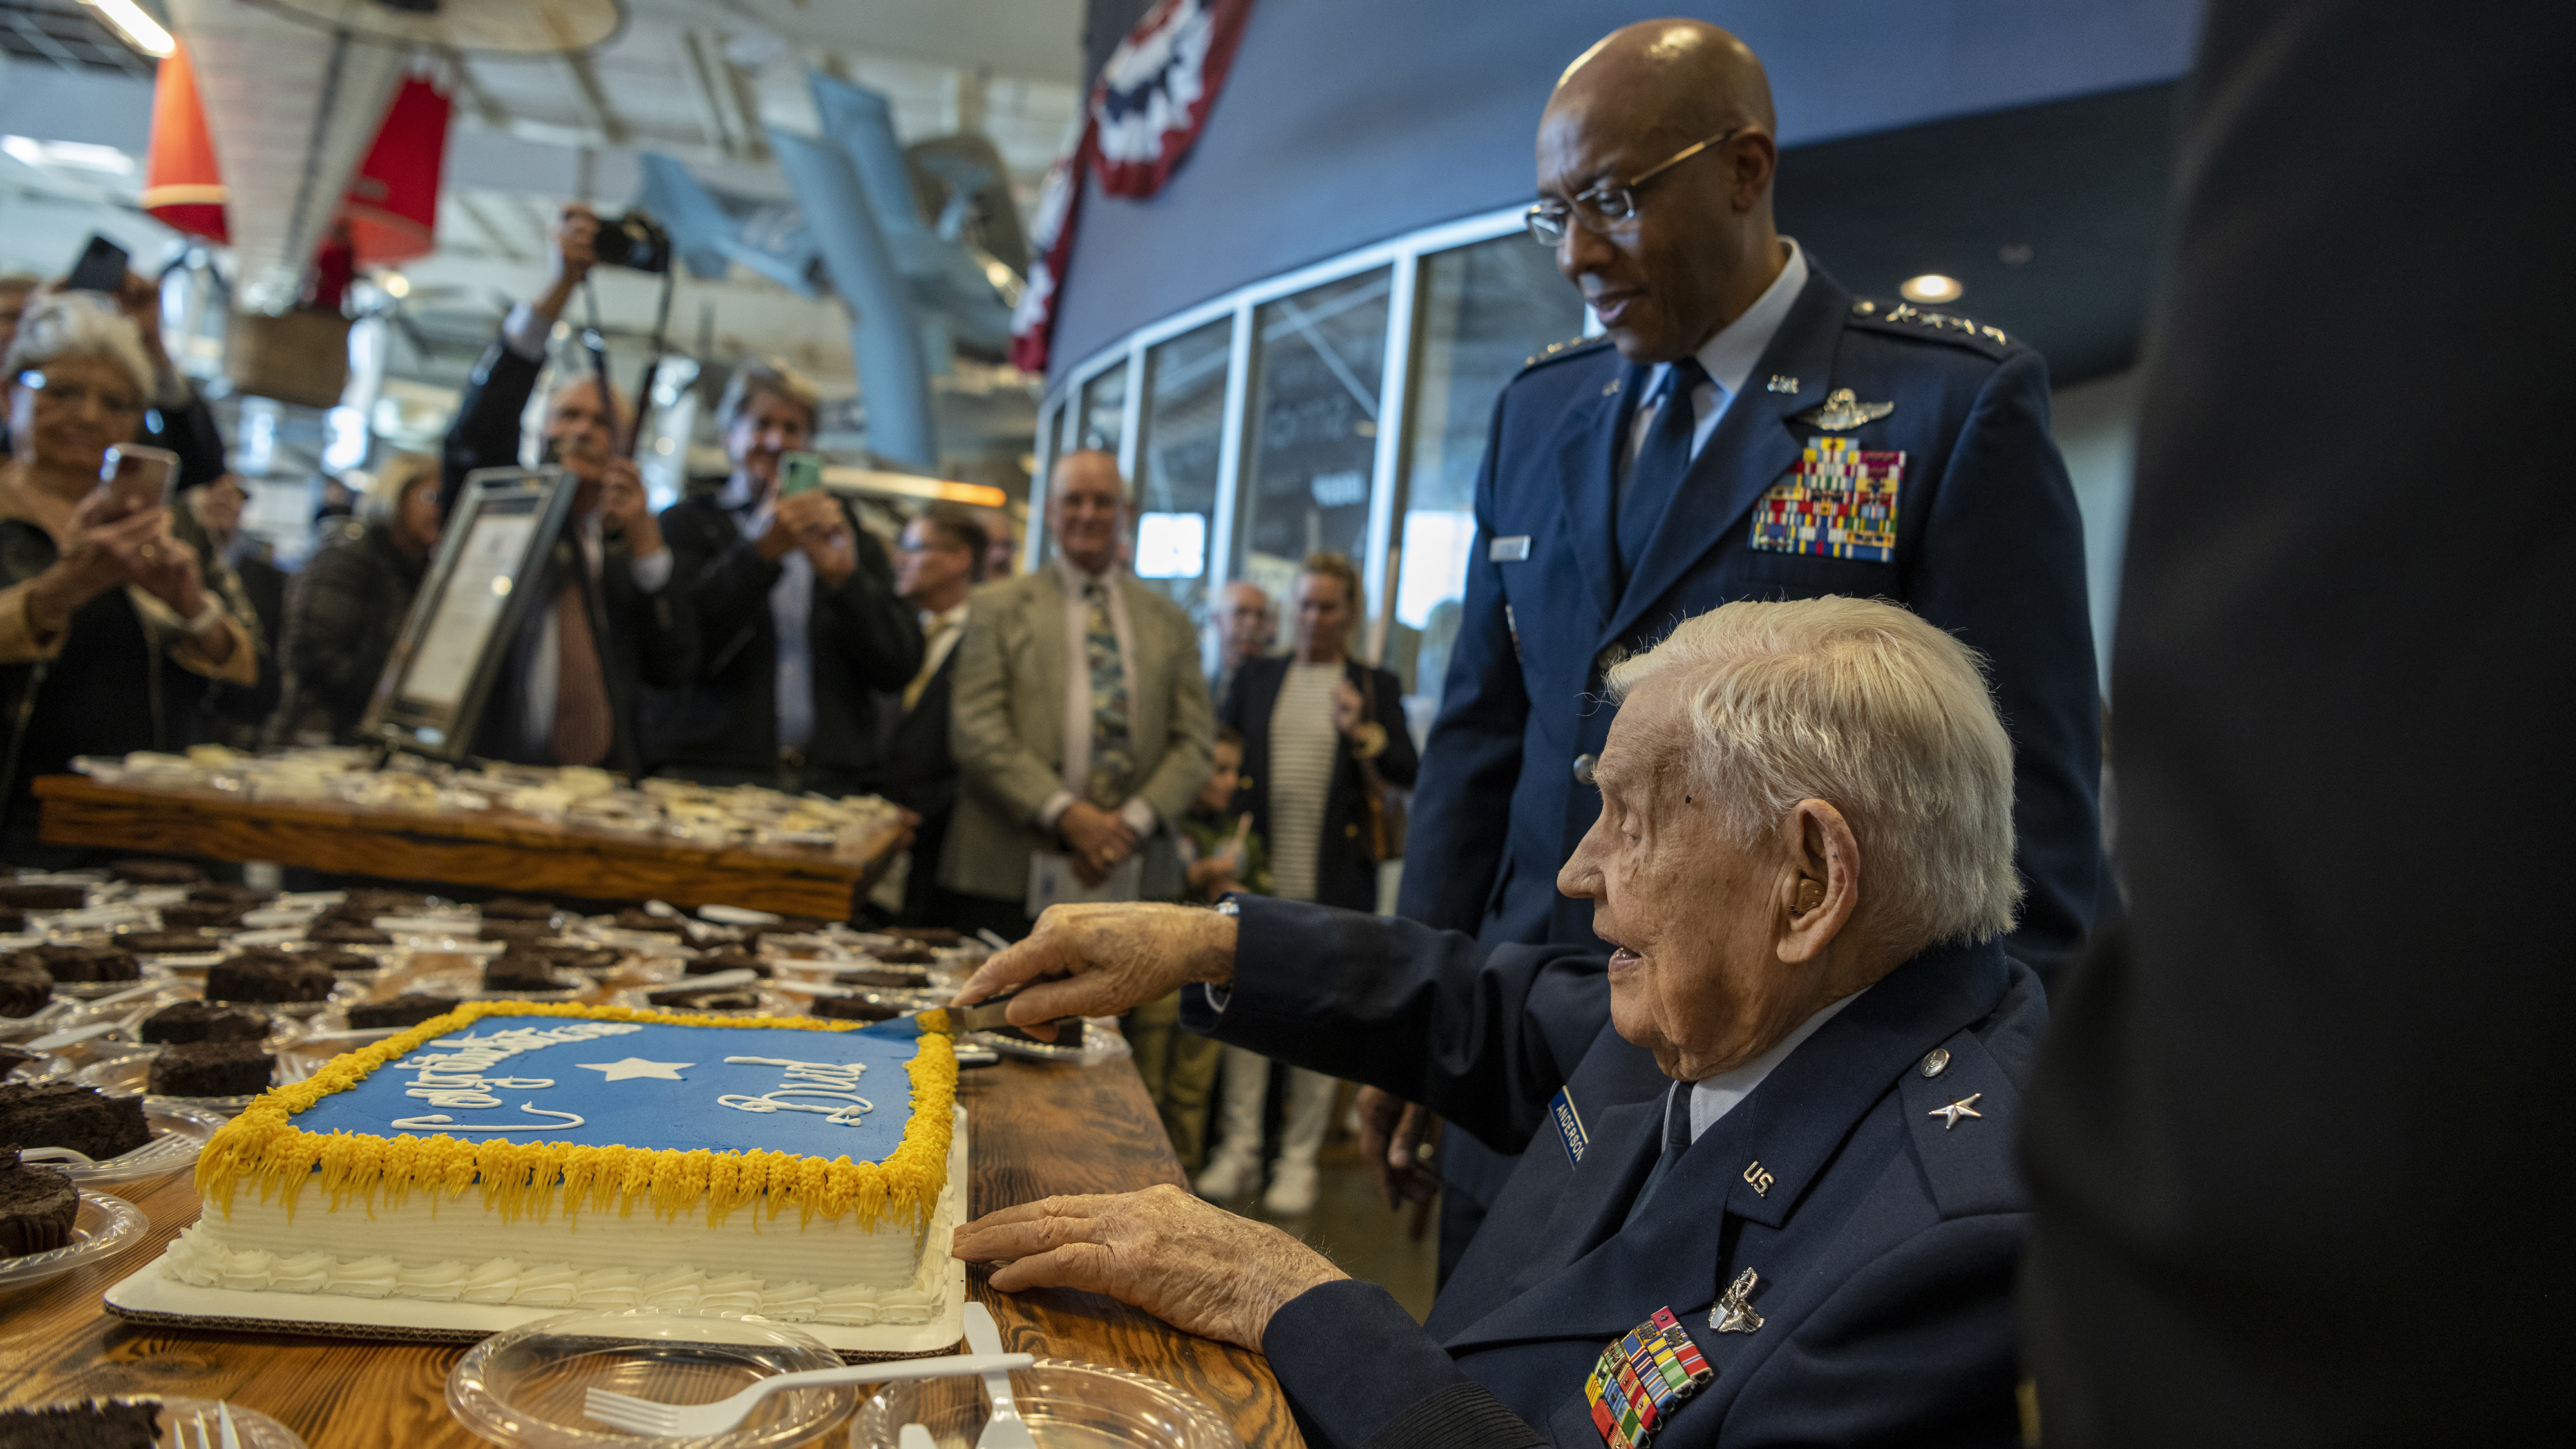 Retired Brig. Gen. Clarence E. 'Bud' Anderson cuts a celebratory cake after an honorary promotion ceremony presided over by U.S. Air Force Chief of Staff Gen. CQ Brown, Jr. at the Aerospace Museum of California in McClellan, California, December 2, 2022. The ceremony was an opportunity to honor the 100-year-old World War II triple ace during the seventy-fifth anniversary year of the Air Force’s establishment as a military service. U.S. Air Force photo by Nicholas Pilch.